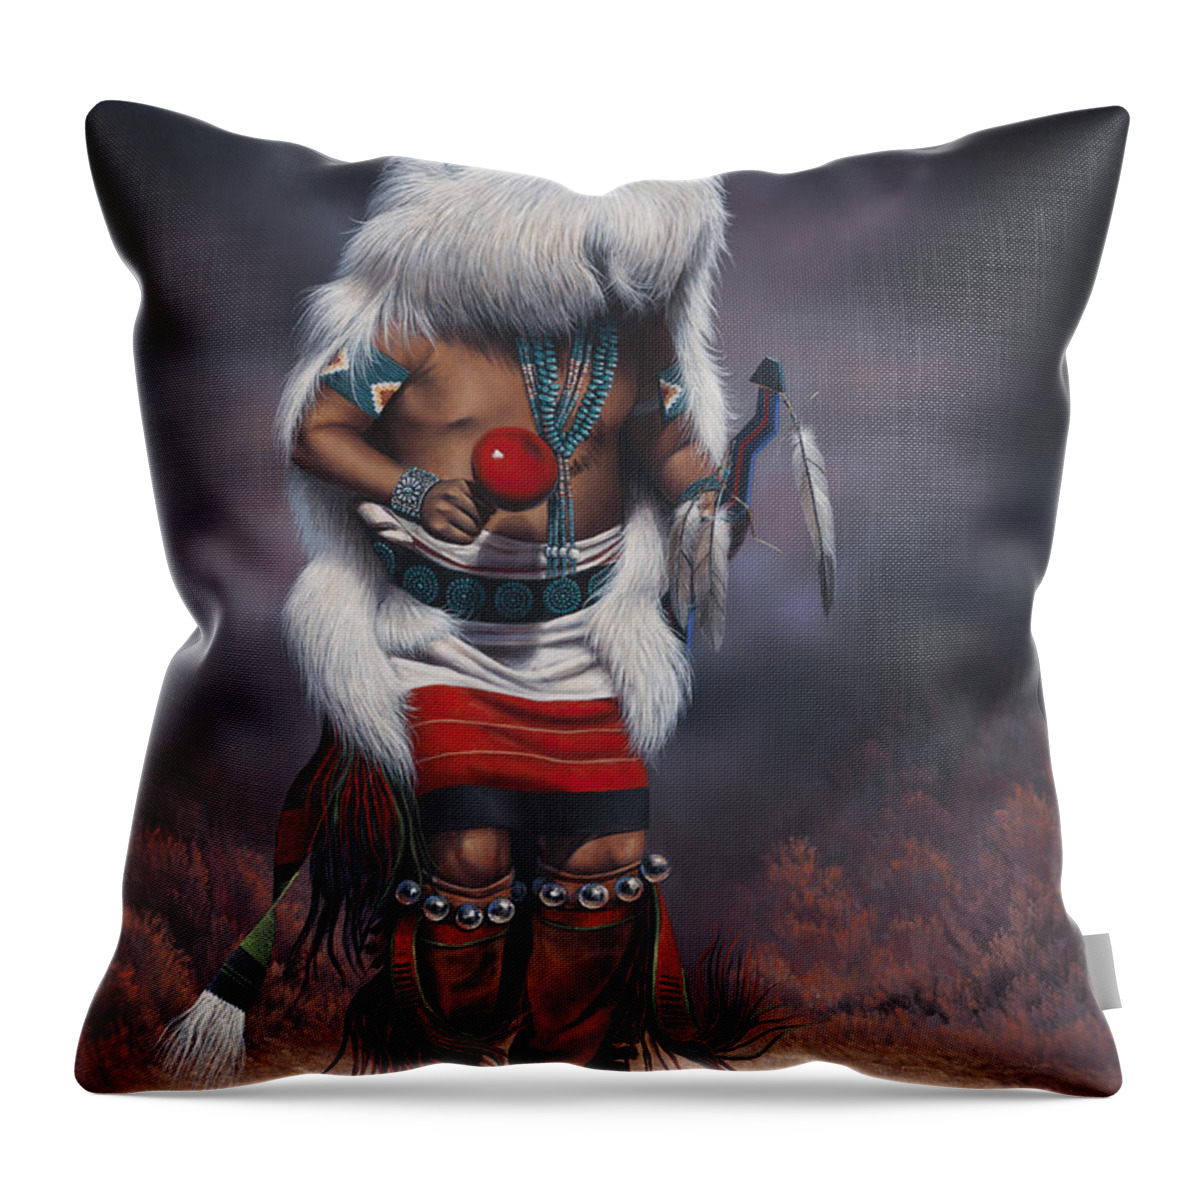 Native-american Throw Pillow featuring the painting Mystic Dancer by Ricardo Chavez-Mendez